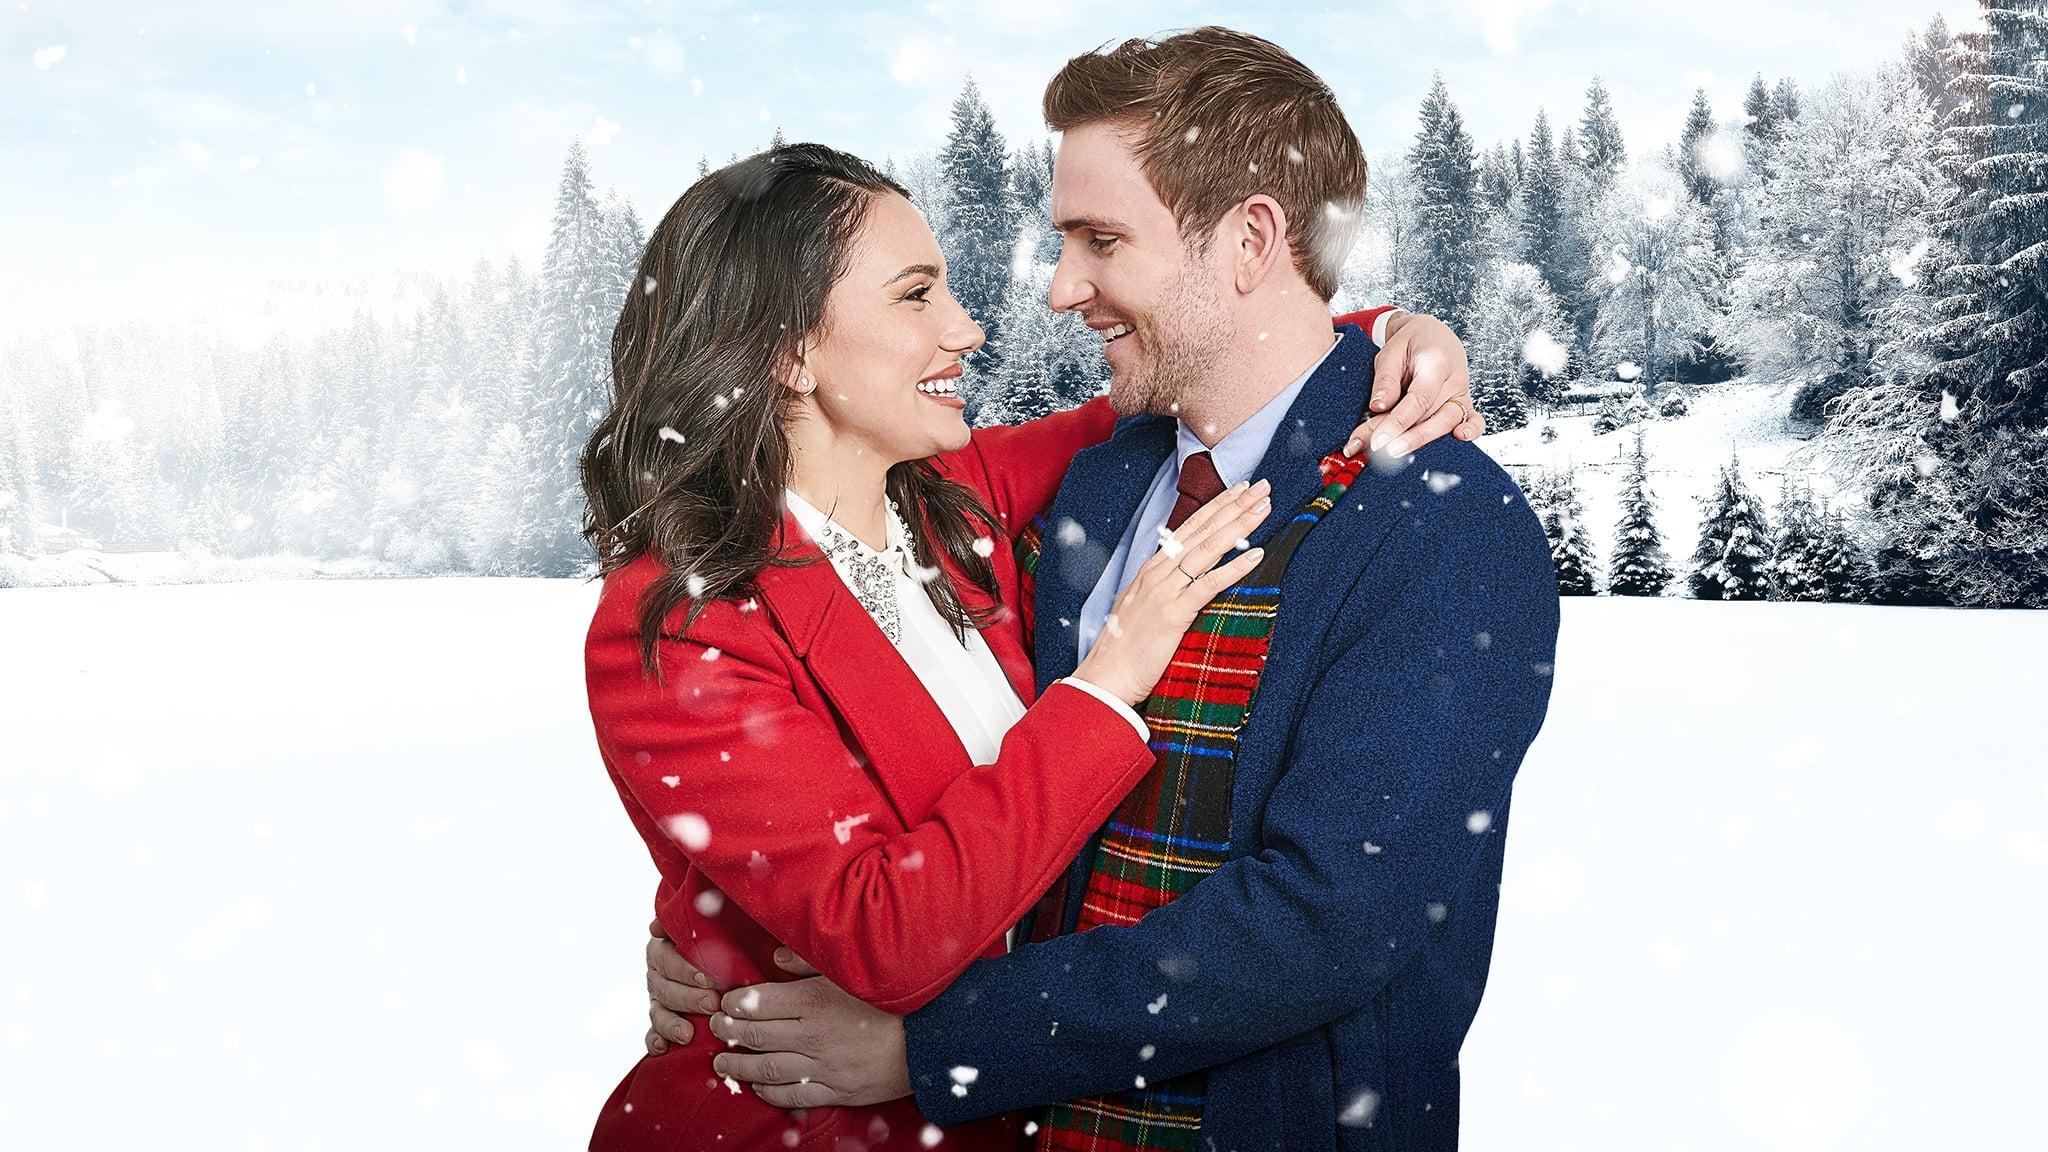 Falling in Love at Christmas backdrop